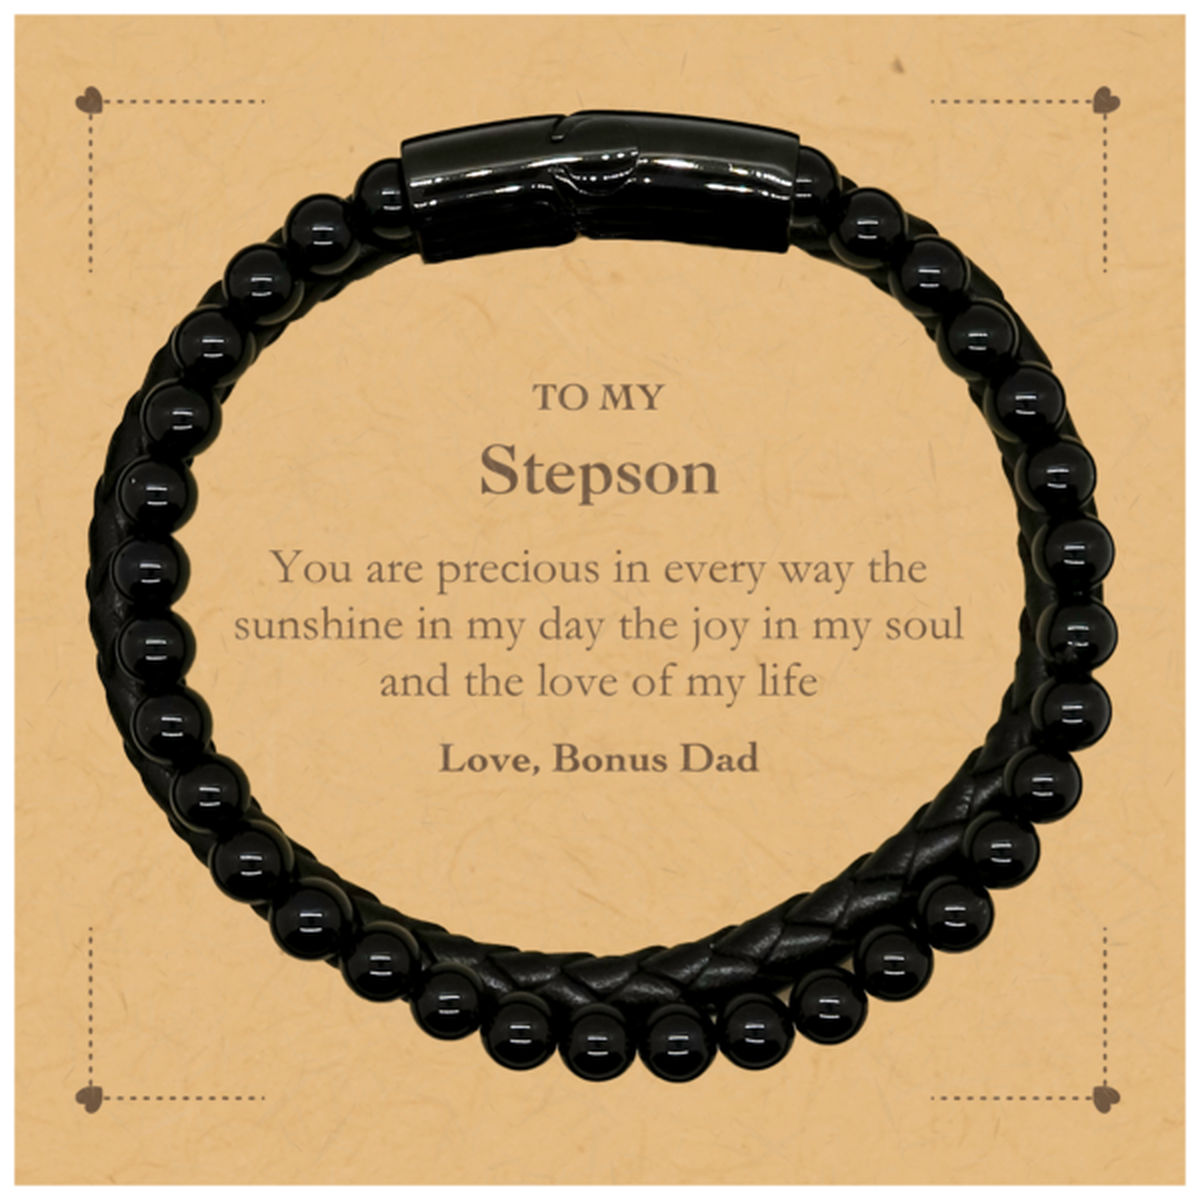 Graduation Gifts for Stepson Stone Leather Bracelets Present from Bonus Dad, Christmas Stepson Birthday Gifts Stepson You are precious in every way the sunshine in my day. Love, Bonus Dad